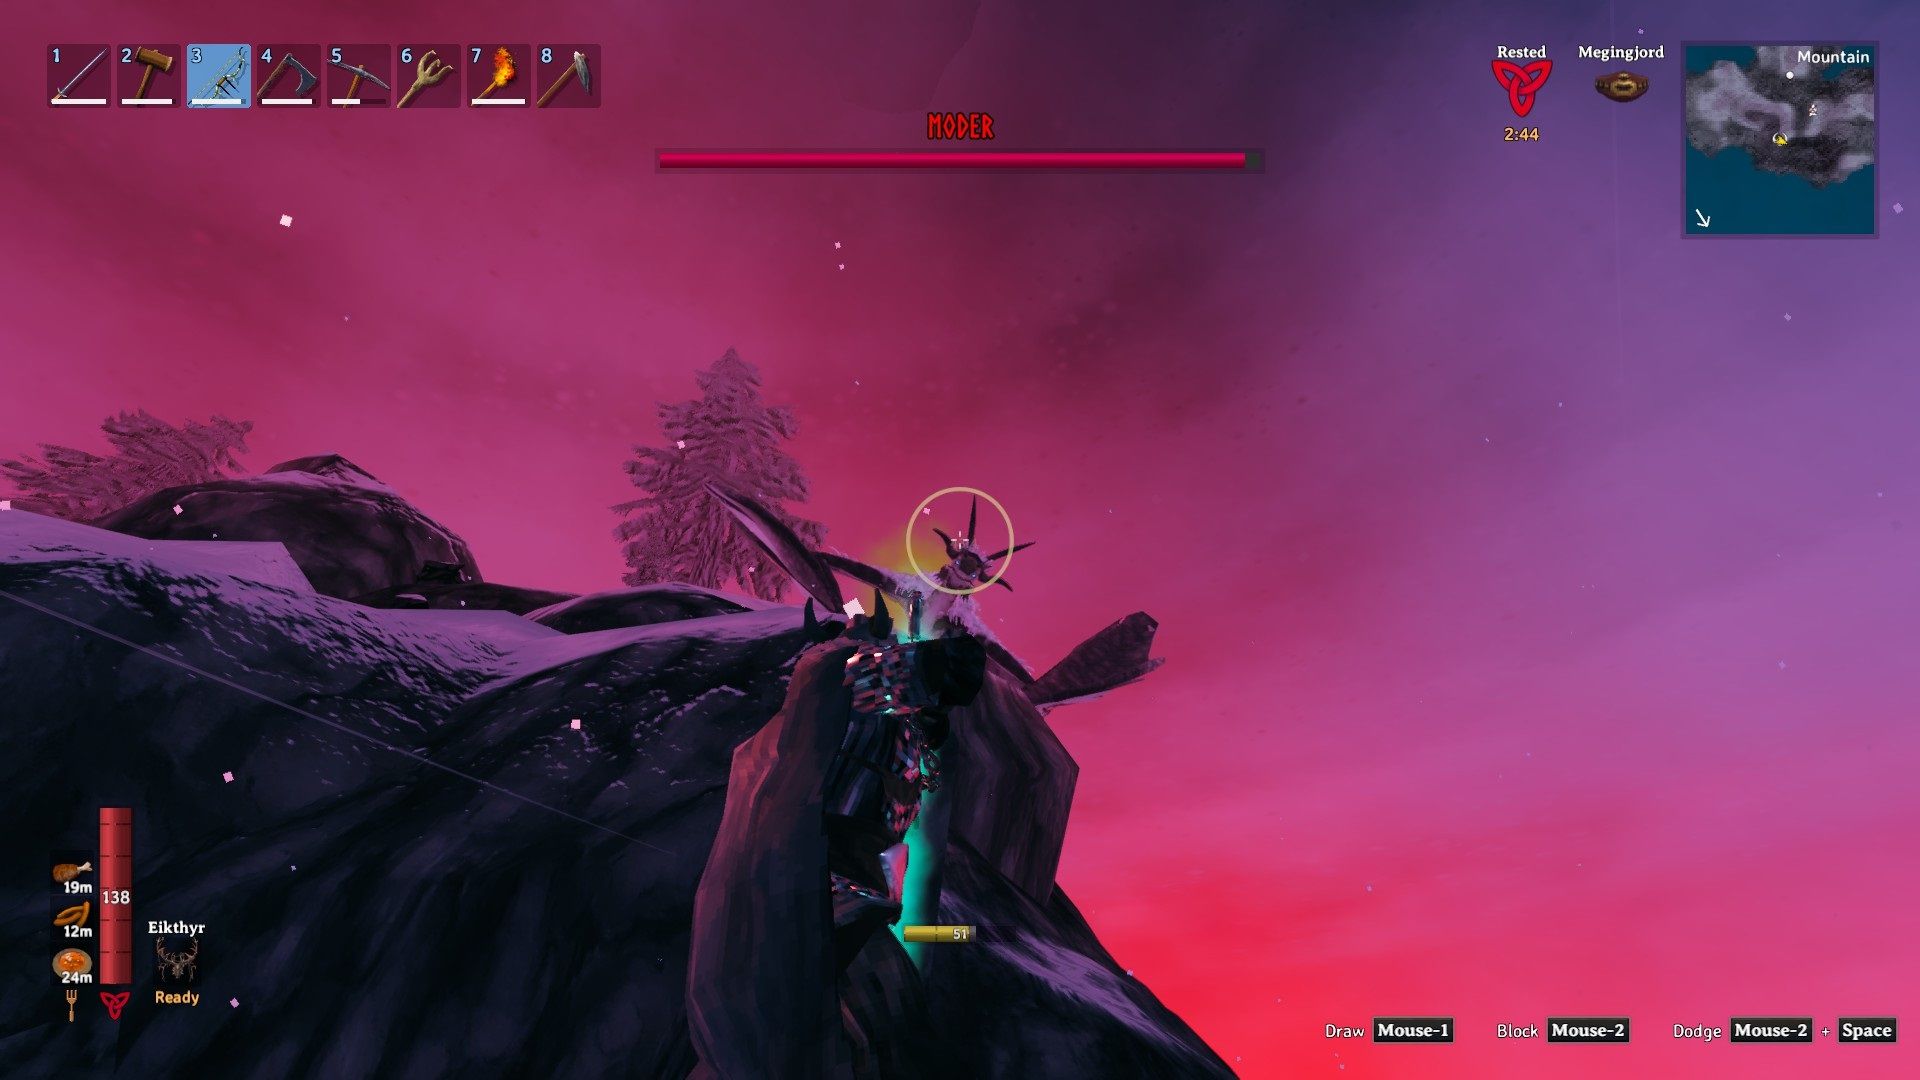 fighting moder on a cliff.jpg